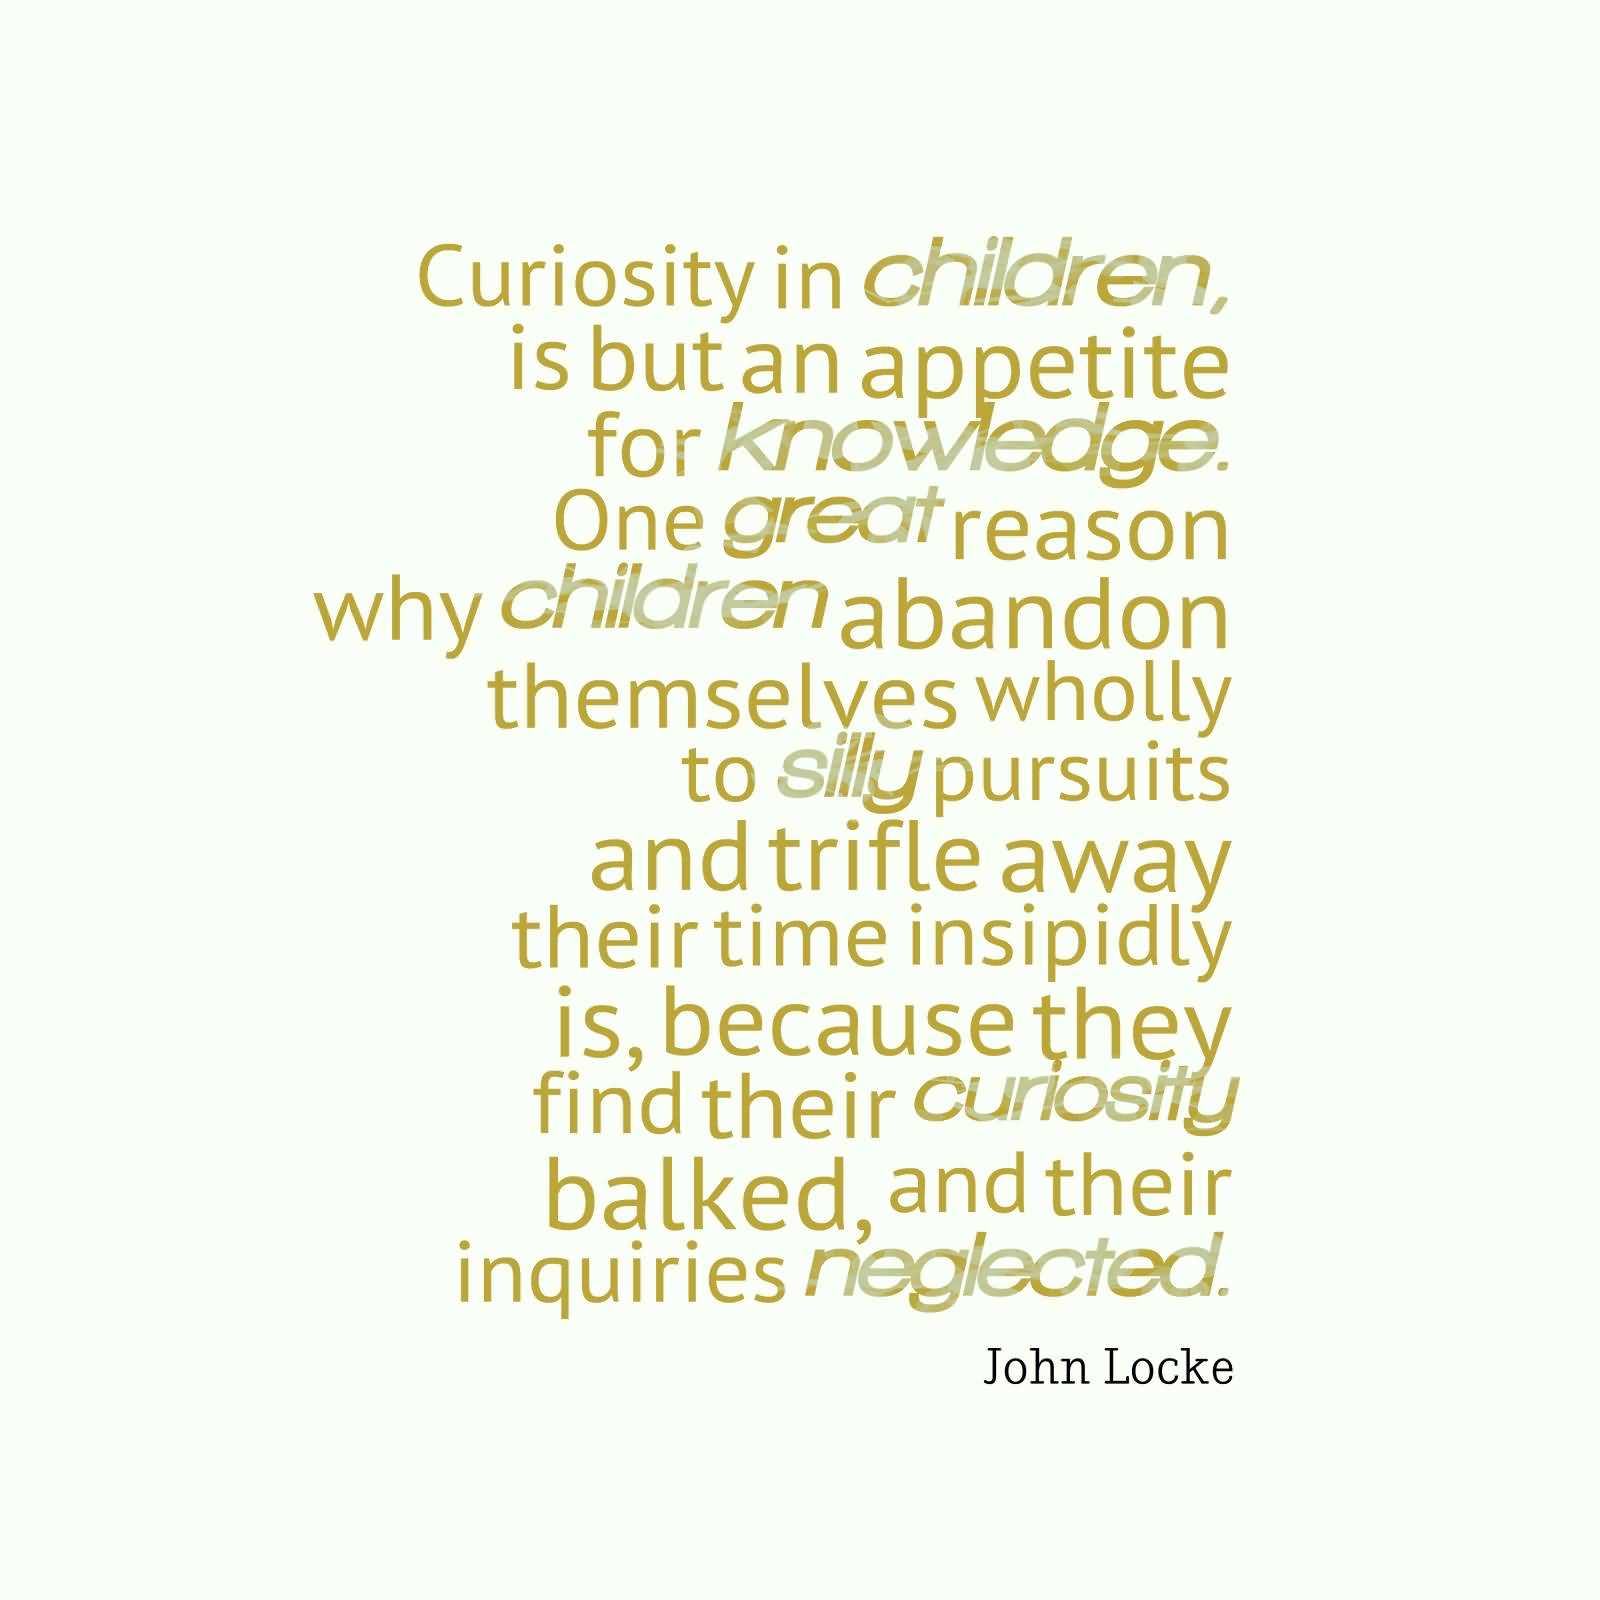 Curiosity in children, is but an appetite for knowledge. One great reason why children abandon themselves wholly to silly pursuits and trifle away their time insipidly is, because they find their curiosity balked, and their inquiries neglected.